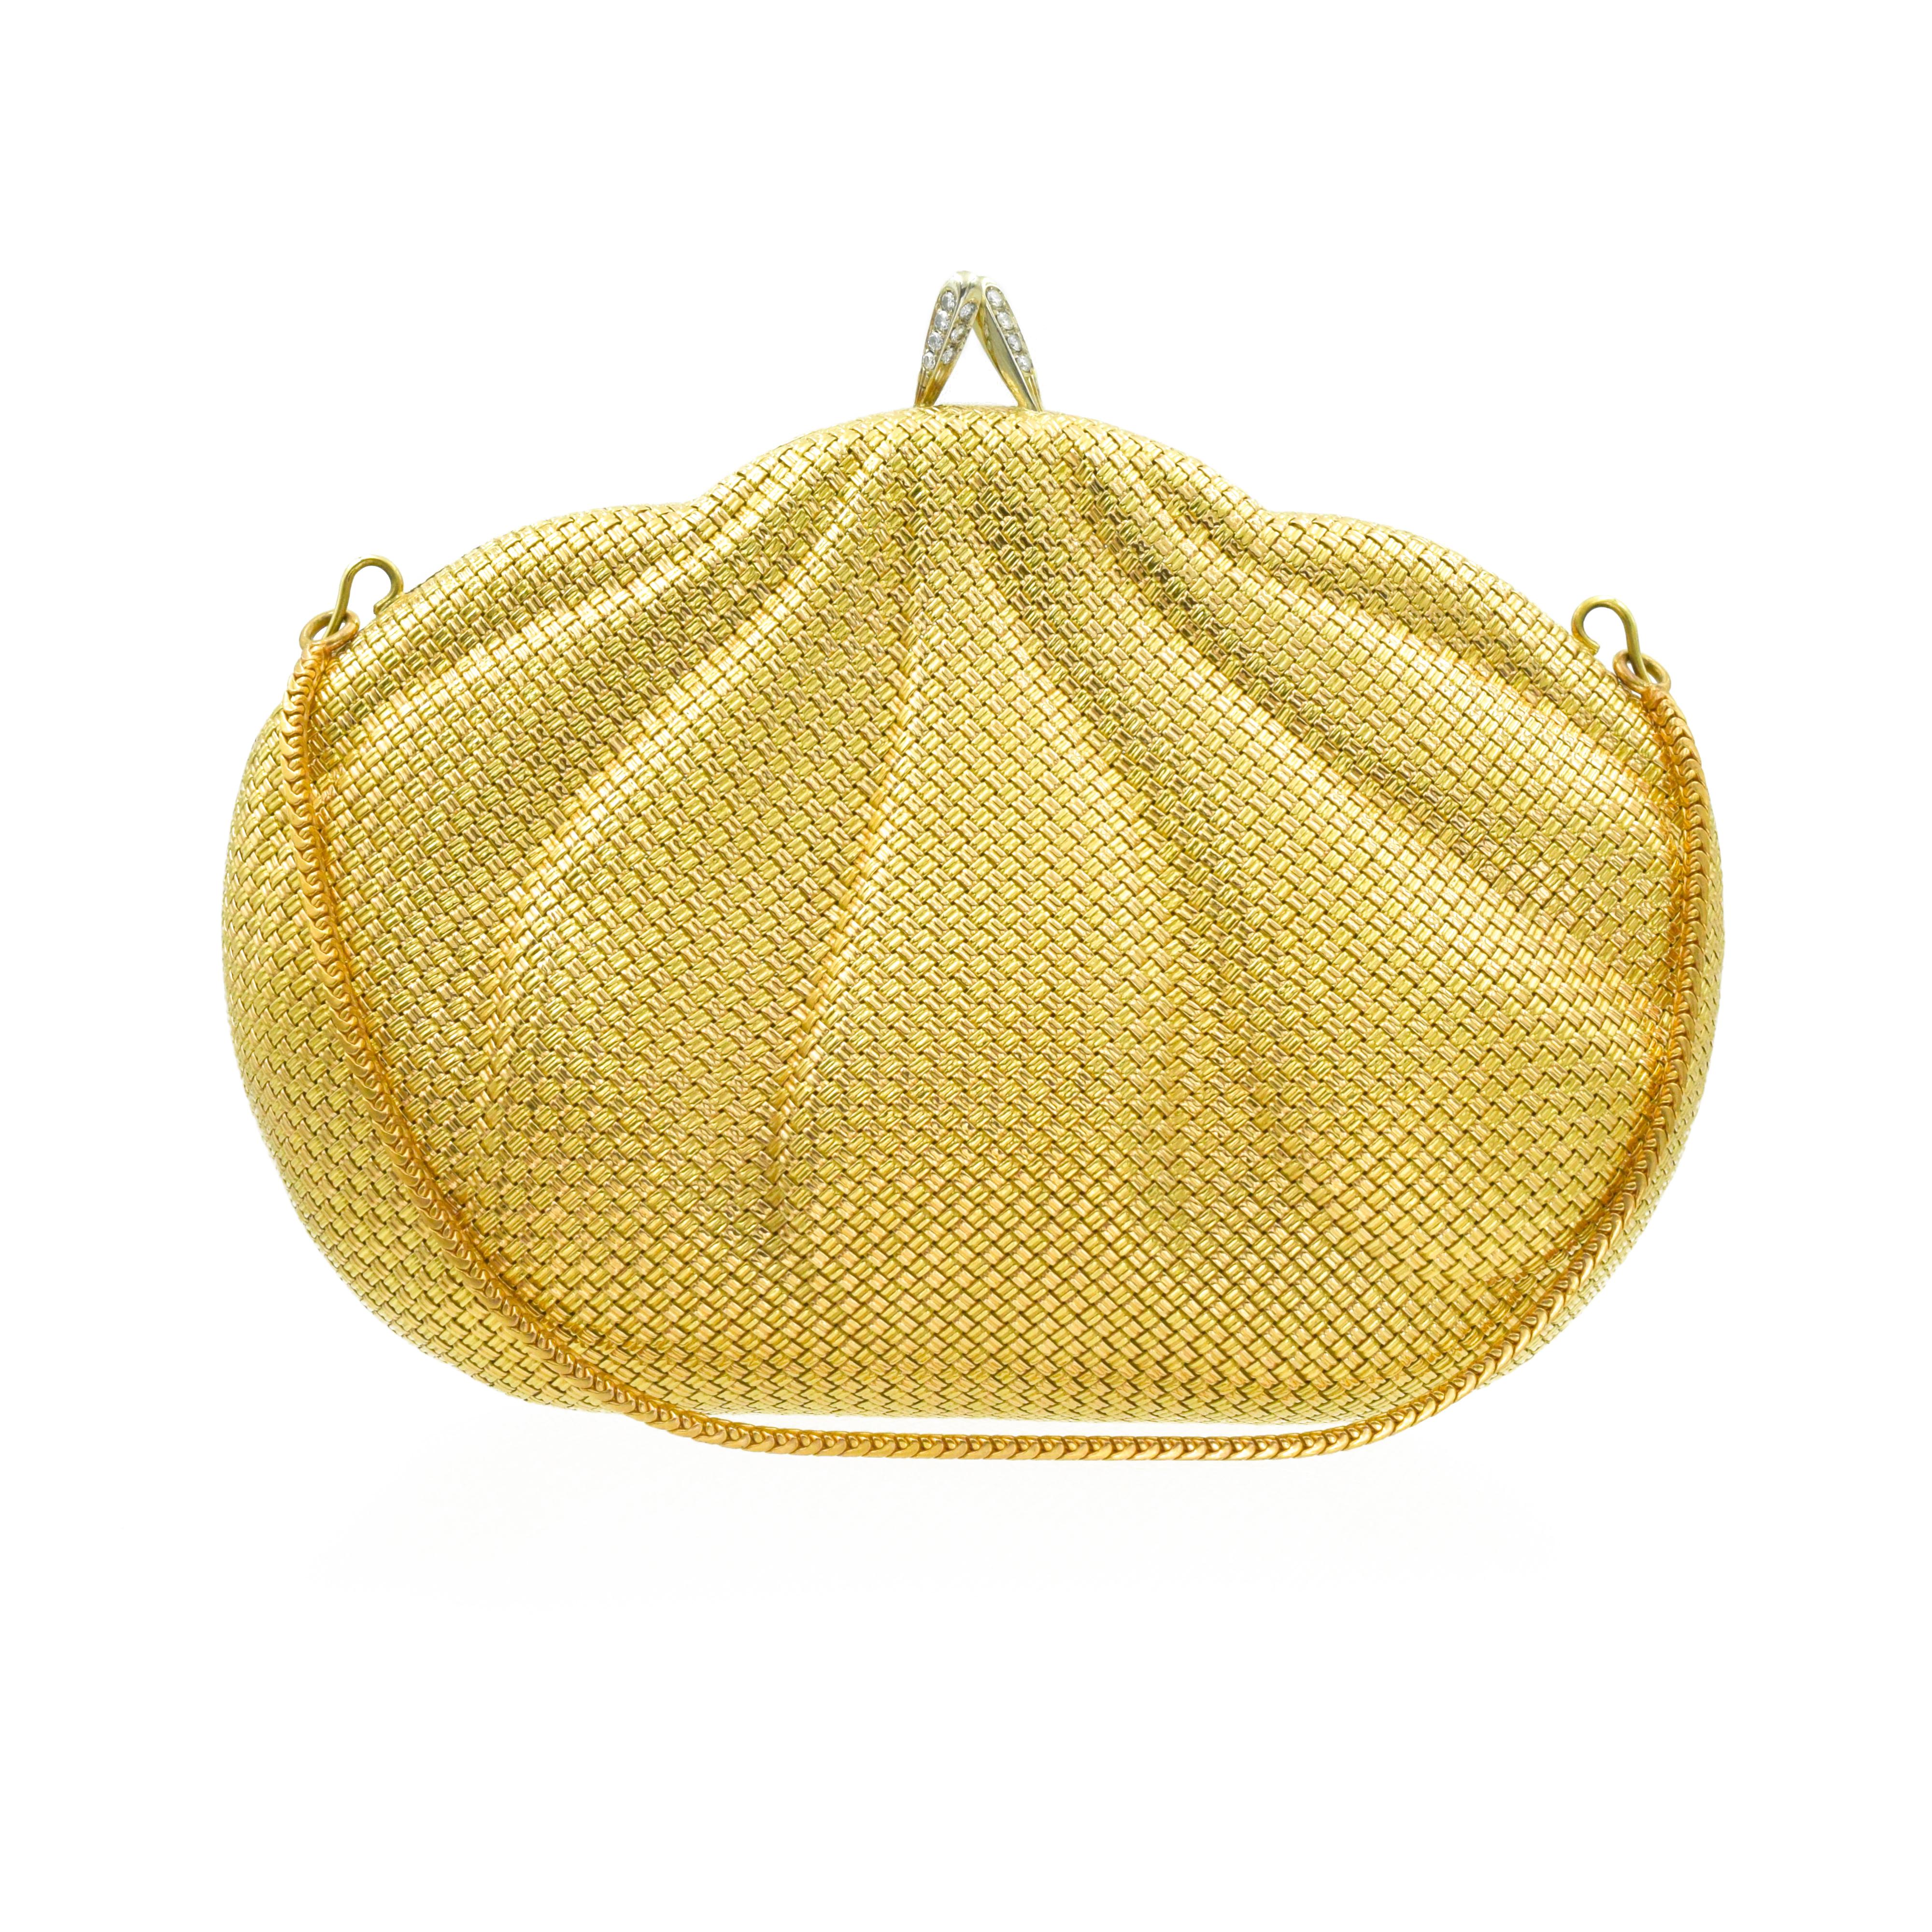  Yellow Gold and diamond evening bag, a comb and a powder compact The evening bag of basket weave design, with a brilliant- cut diamond clasp, 
The purse is measuring approximately 155 x 100 x 60mm, with maker's mark and the  with a comb is